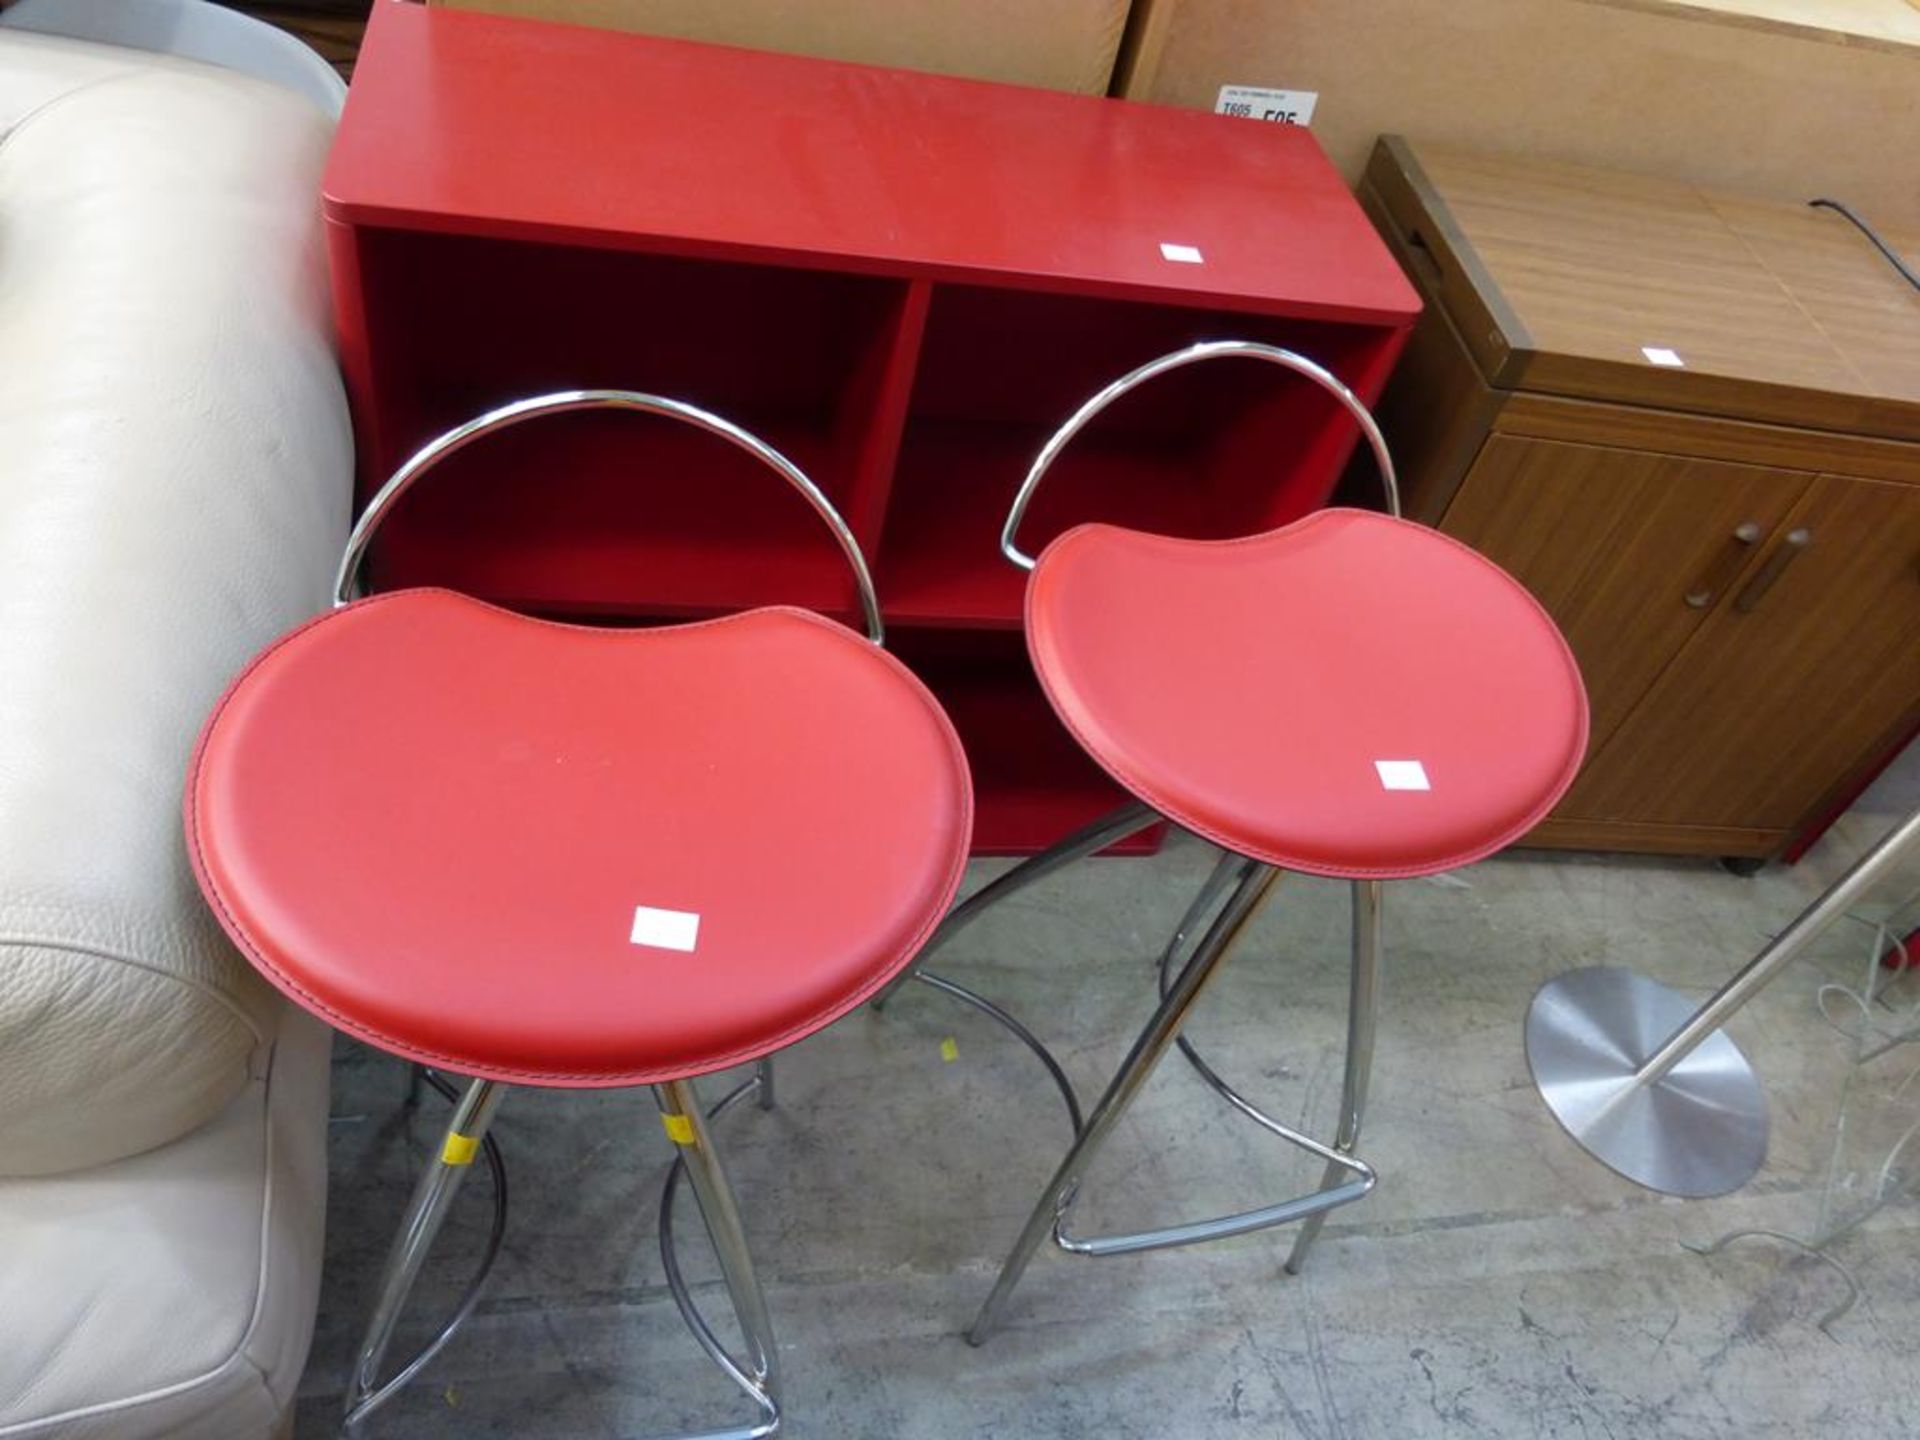 A pair of 'Cattelan Italia' Chrome Bar Stools with Red Leather Seats (together with a similar Red